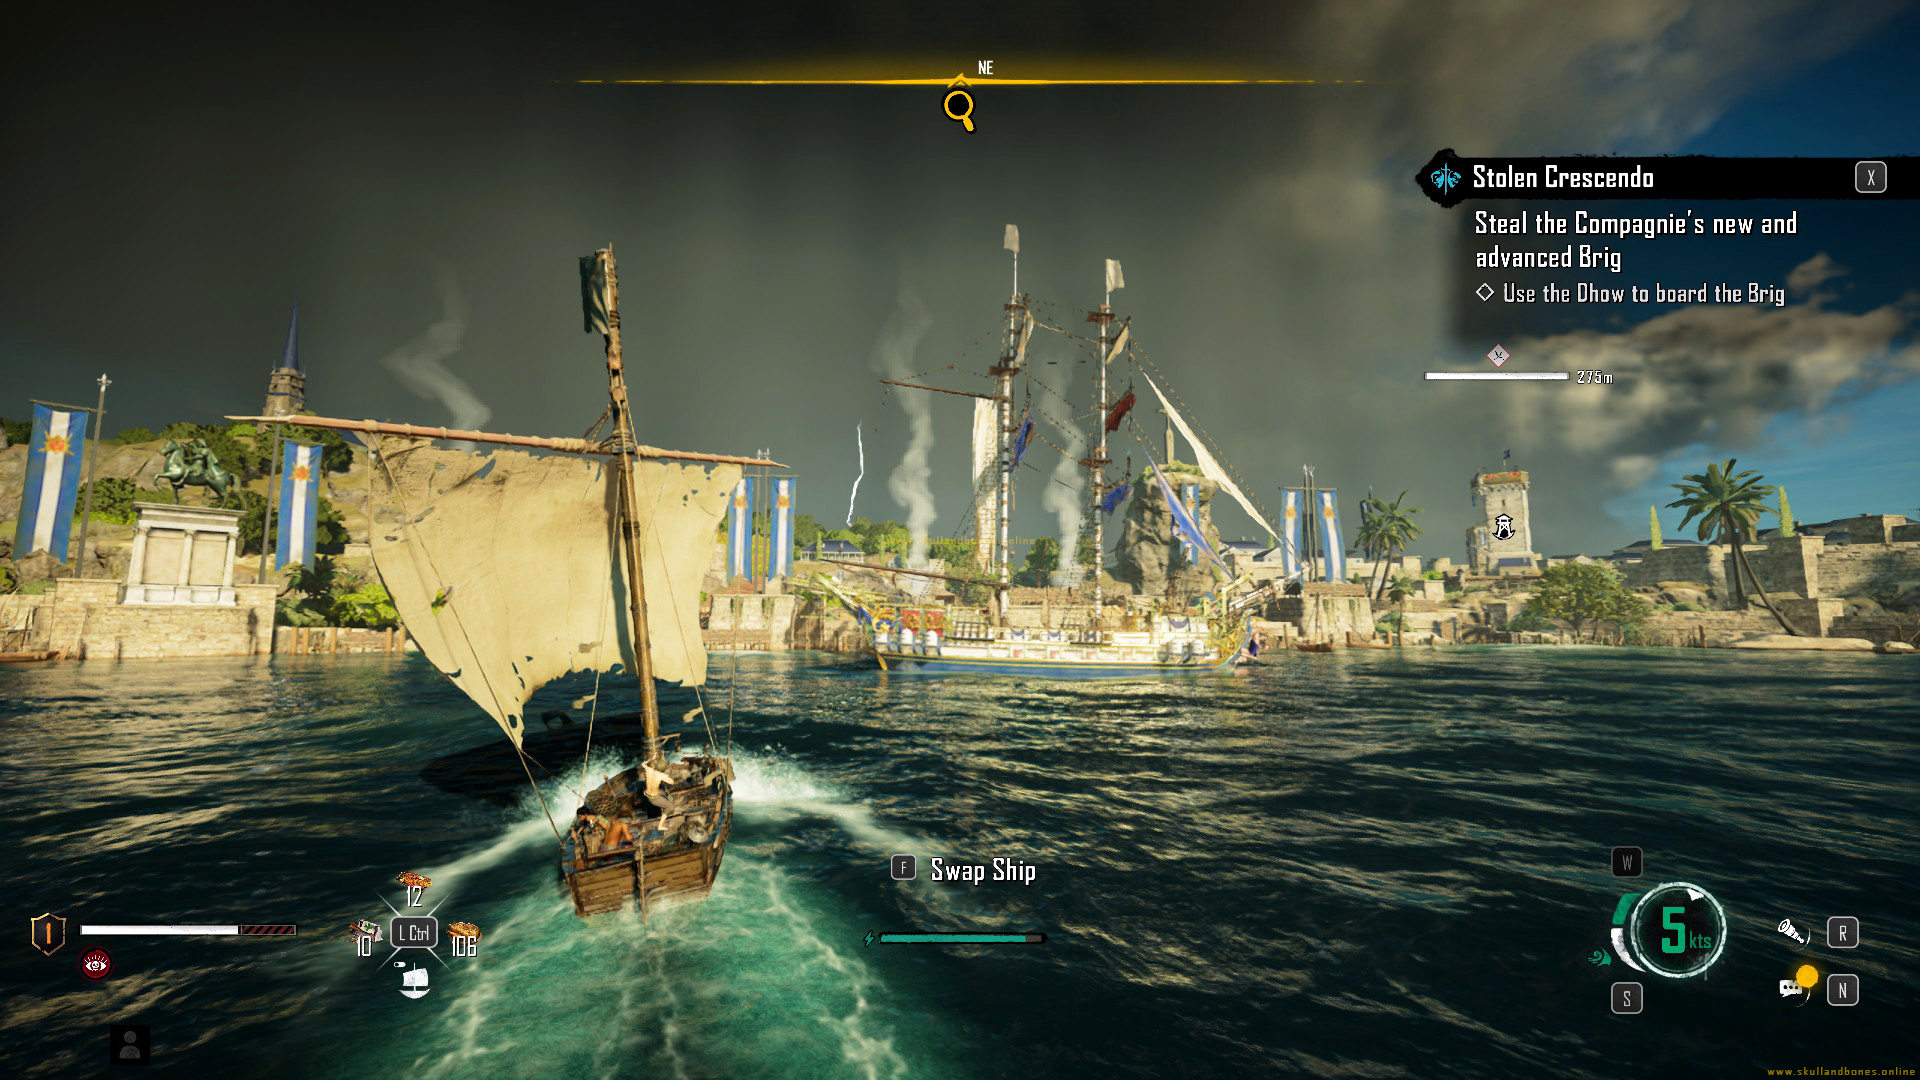 Skull and Bones – Quest – Stolen Crescendo - 5. Steal the Compagnie’s new and advanced Brig – swap ships